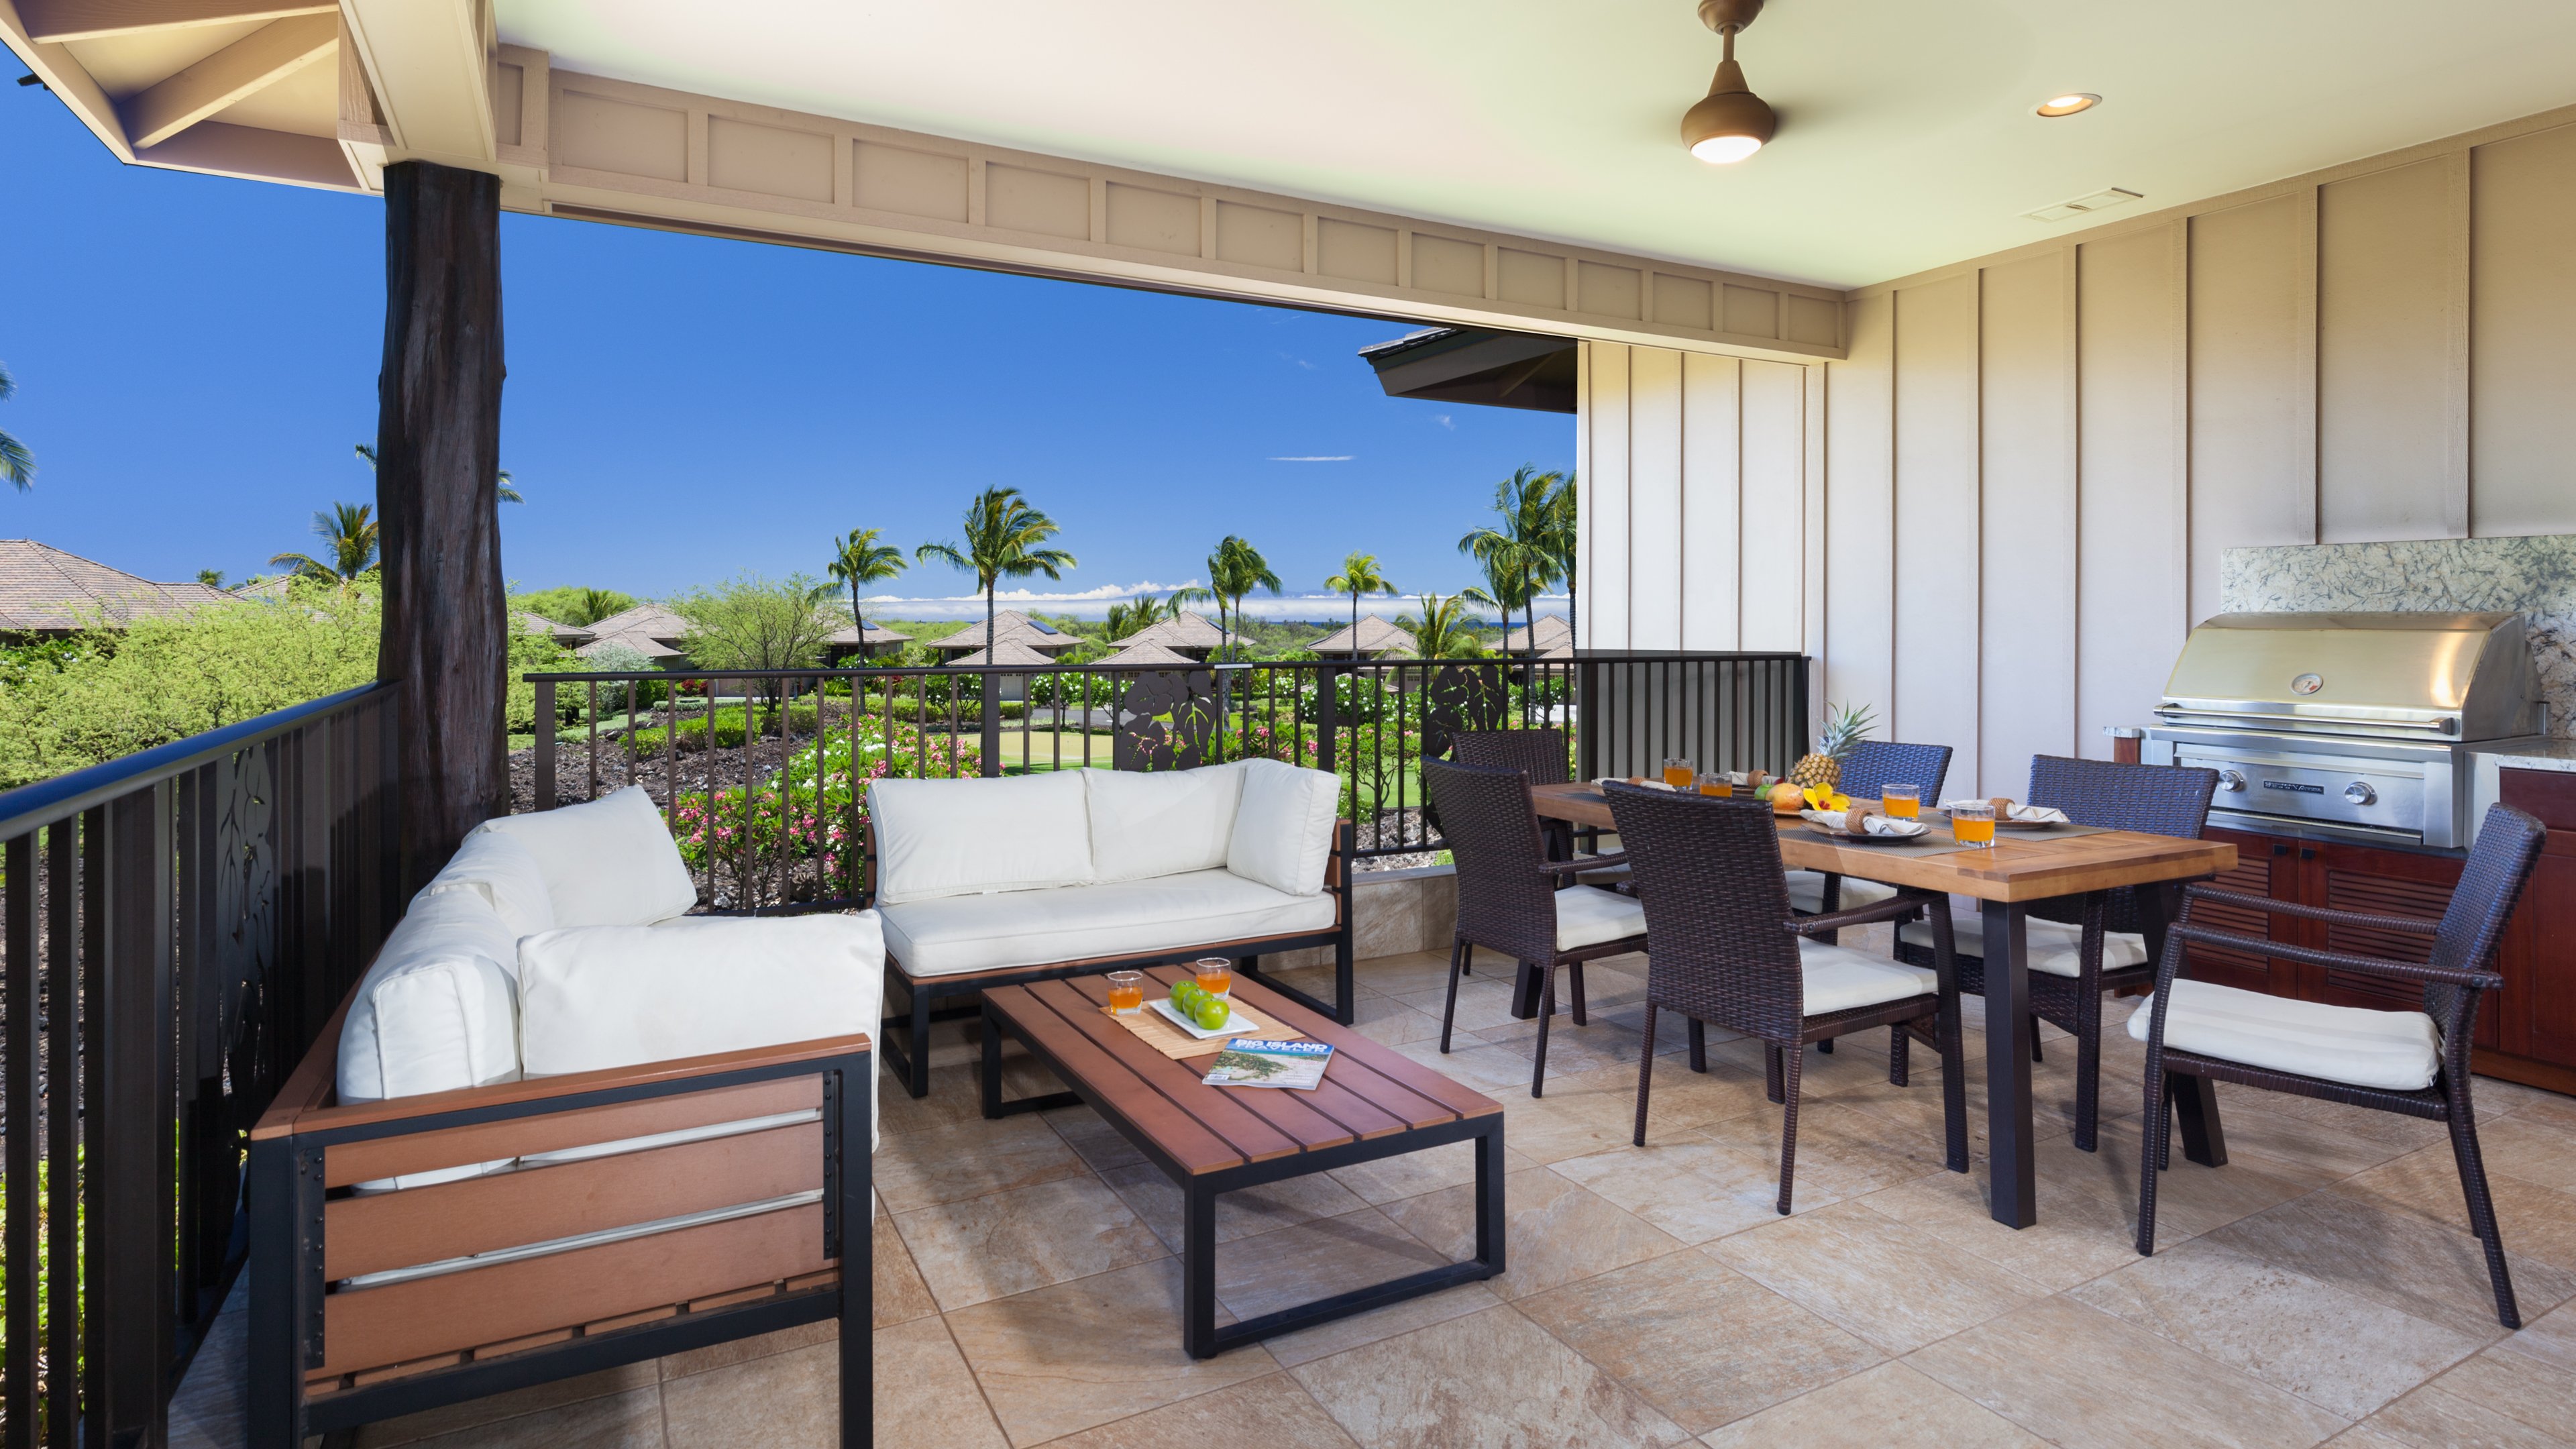 Large covered lanai with private grill